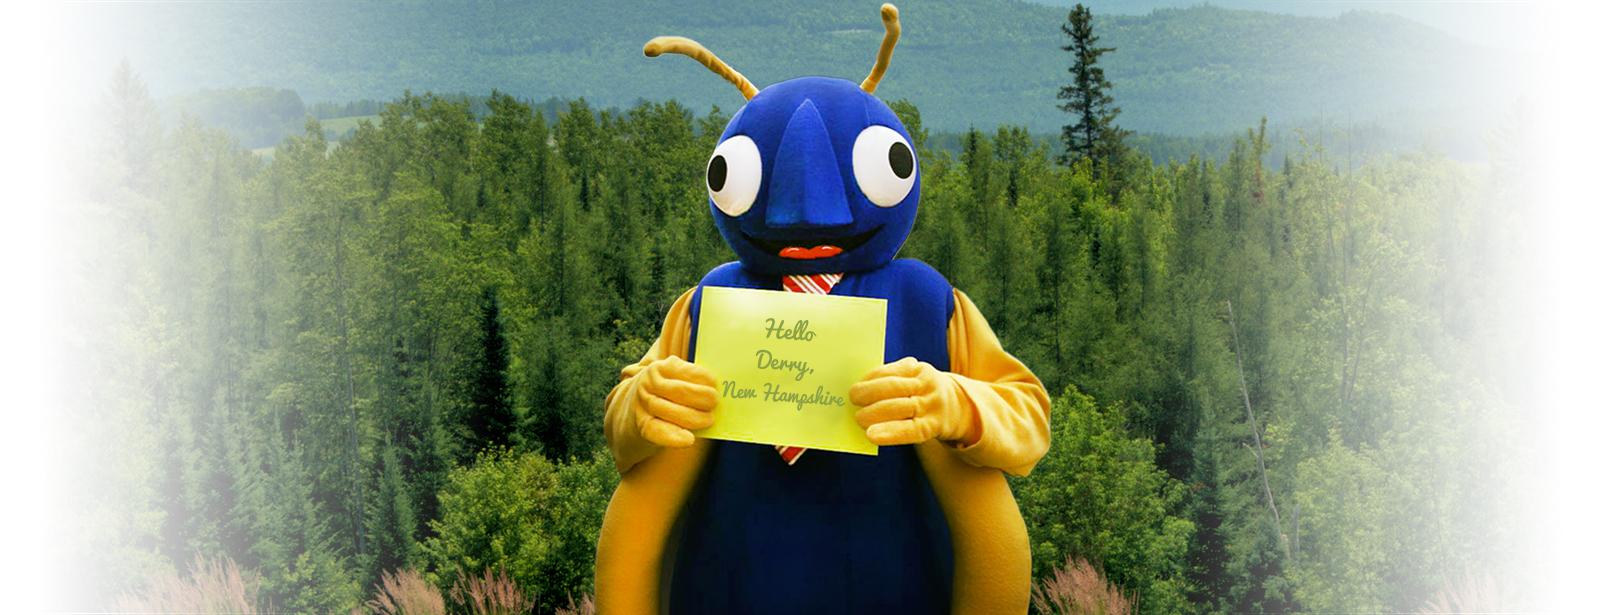 the company mascot holding a derry new hampshire sign